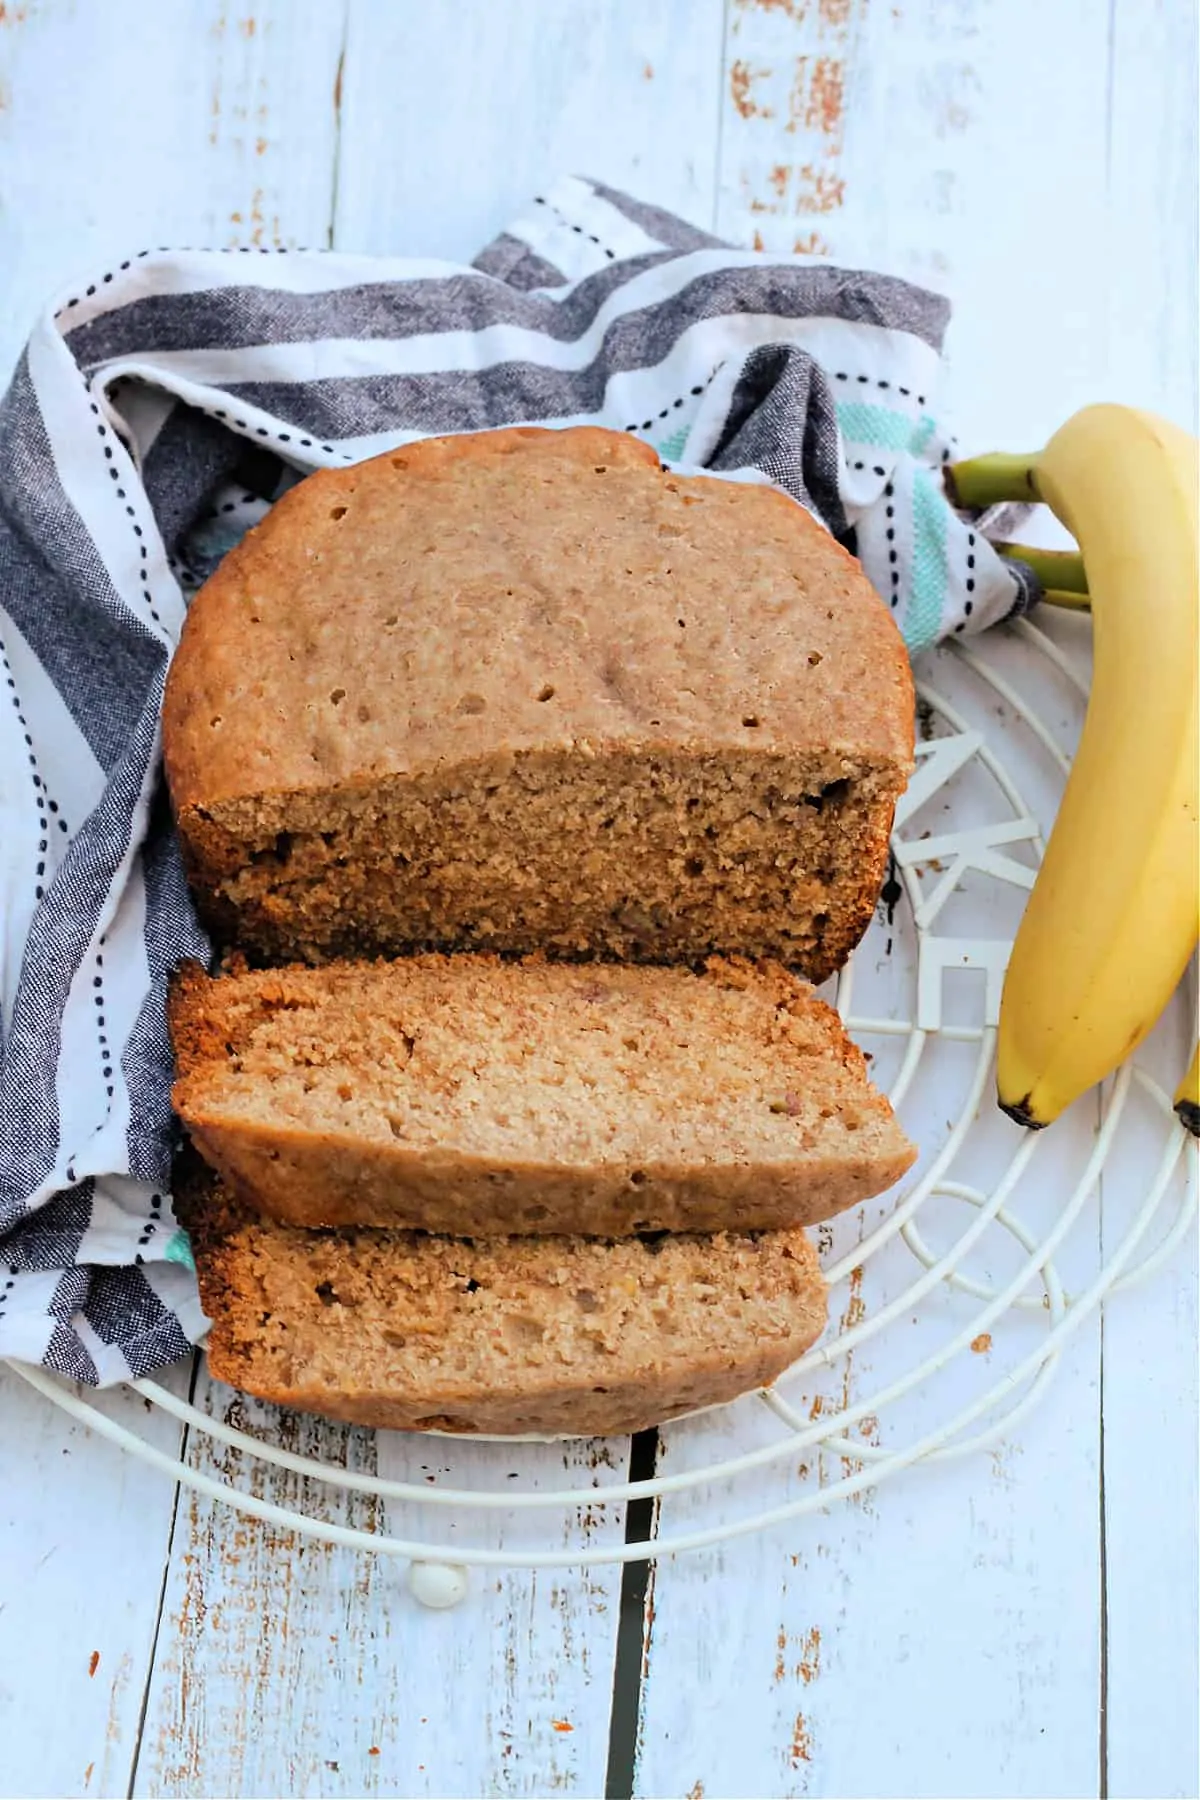 Banana bread on rack with two slices cut out, with bananas and a cloth behind.